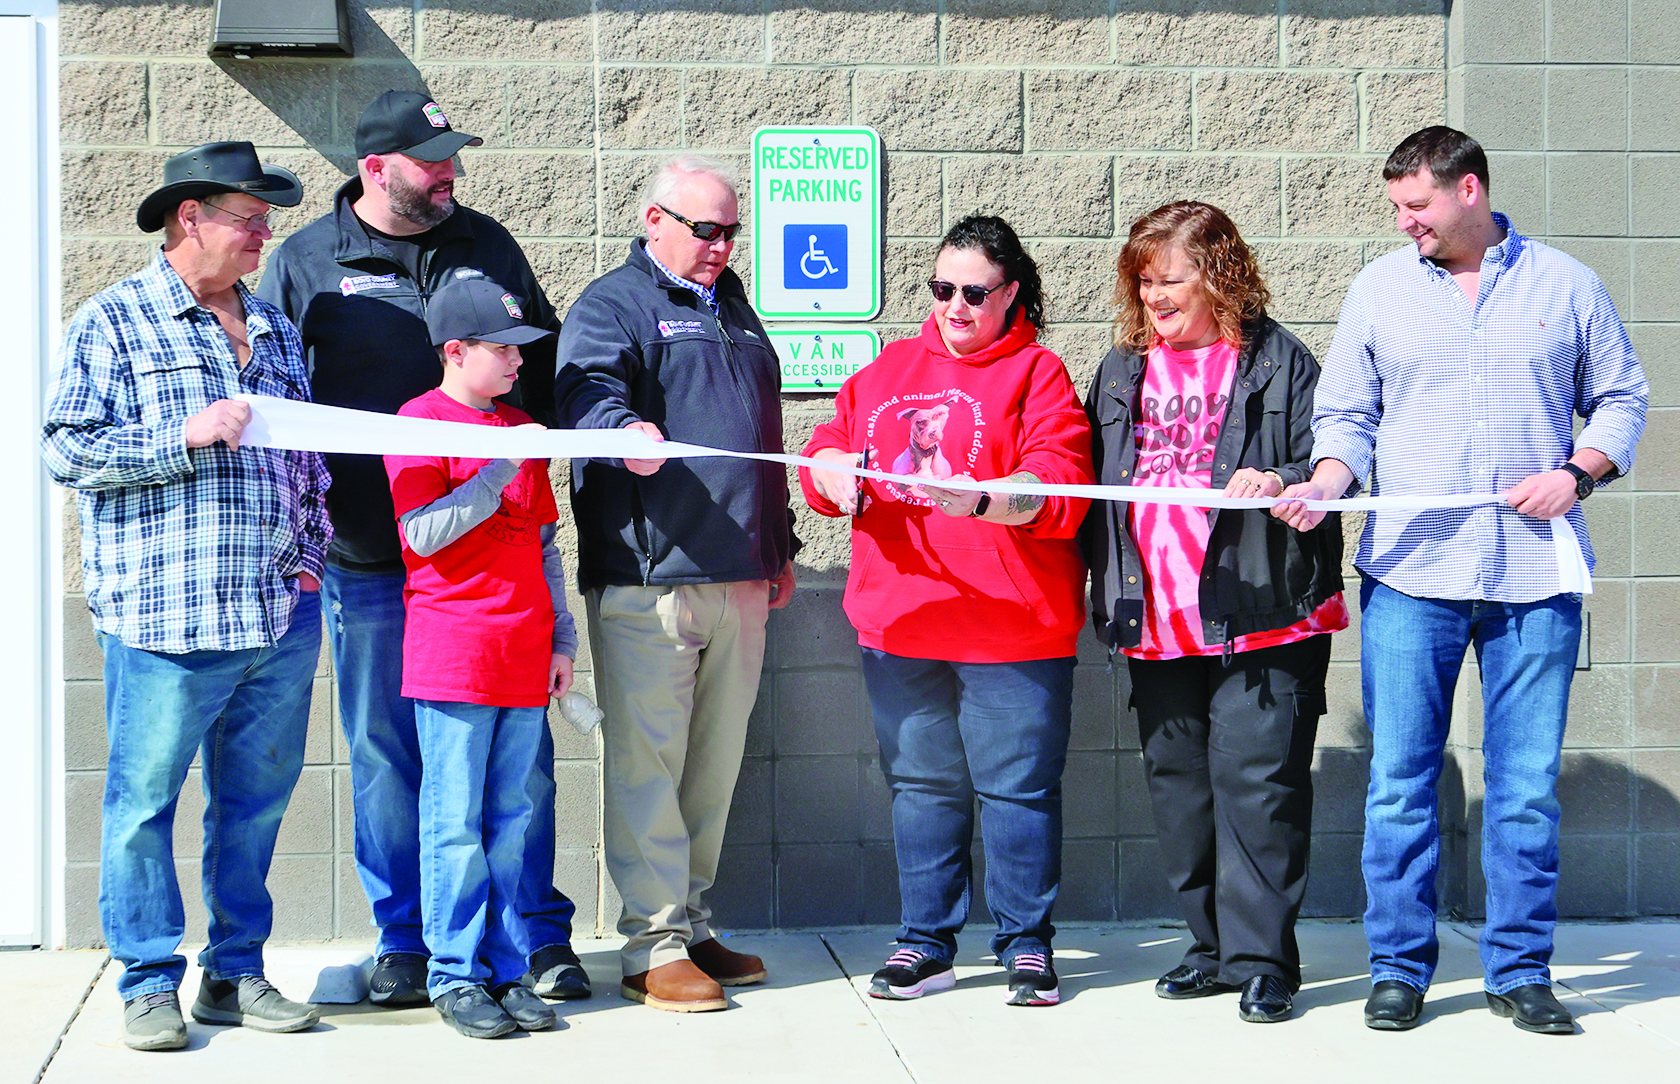 Boyd County’s New Animal Shelter is “Pawsitively Purr-fect”